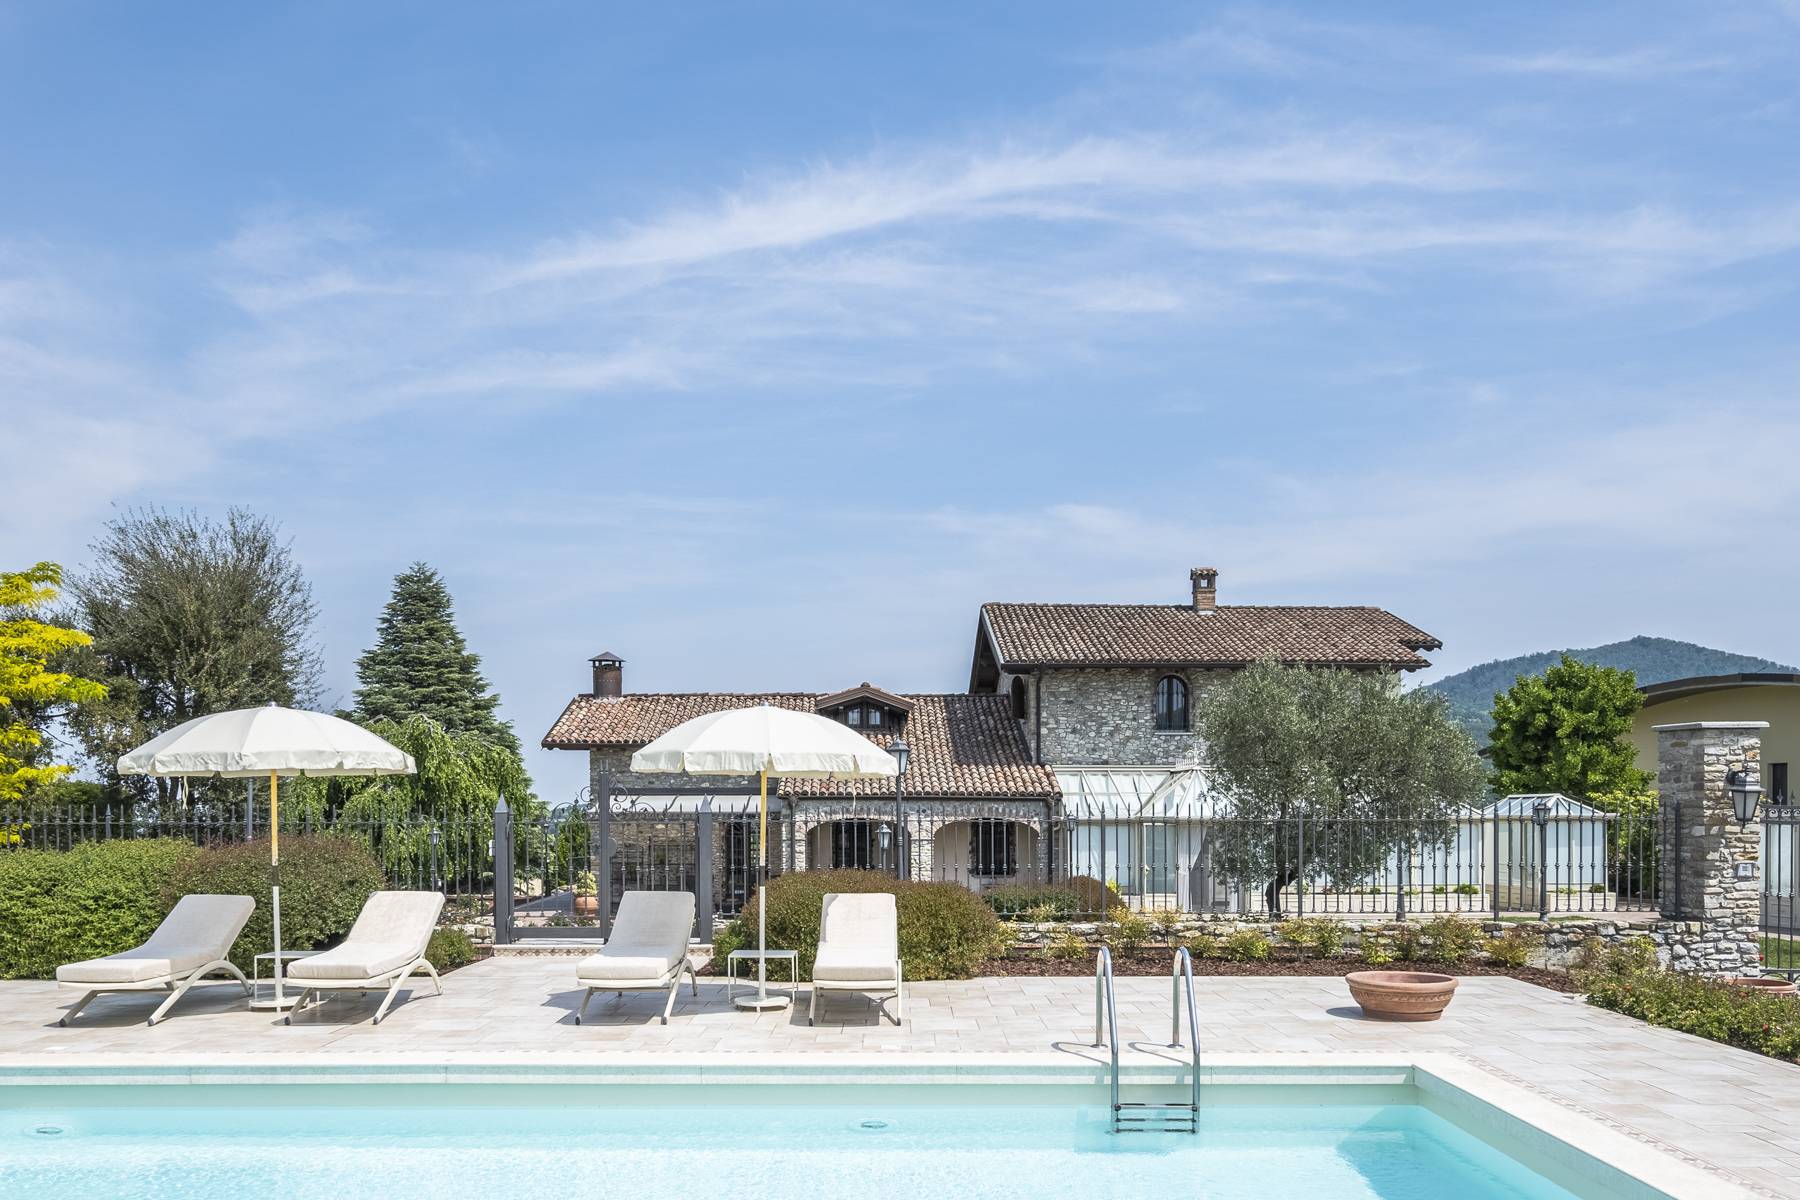 Marvelous villa on the hills of Pavia with swimming pool and spa